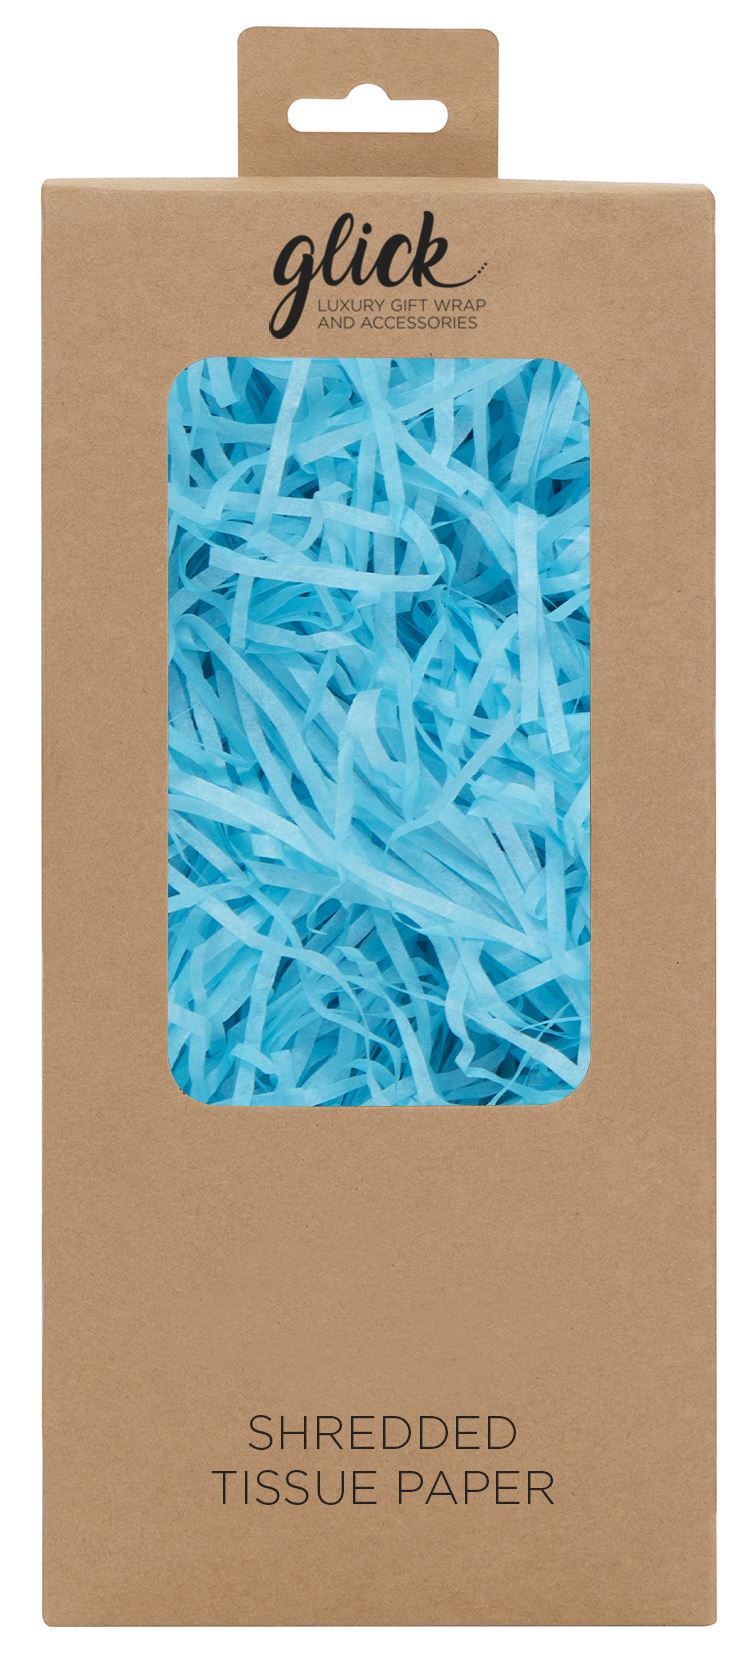 Retail packaging for blue shredded tissue paper. The light blue paper is shown in the window of the packaging